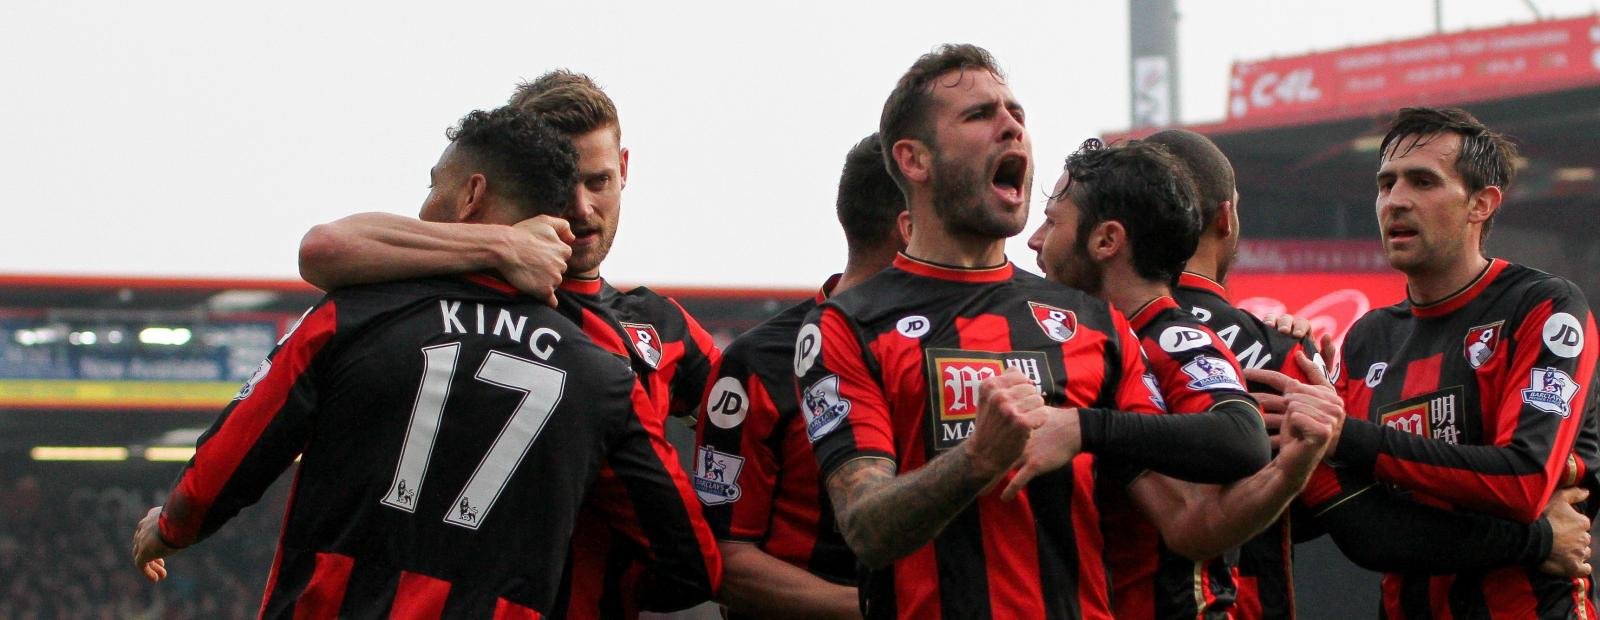 Bournemouth stalwart: I want to be Cherries record-breaker